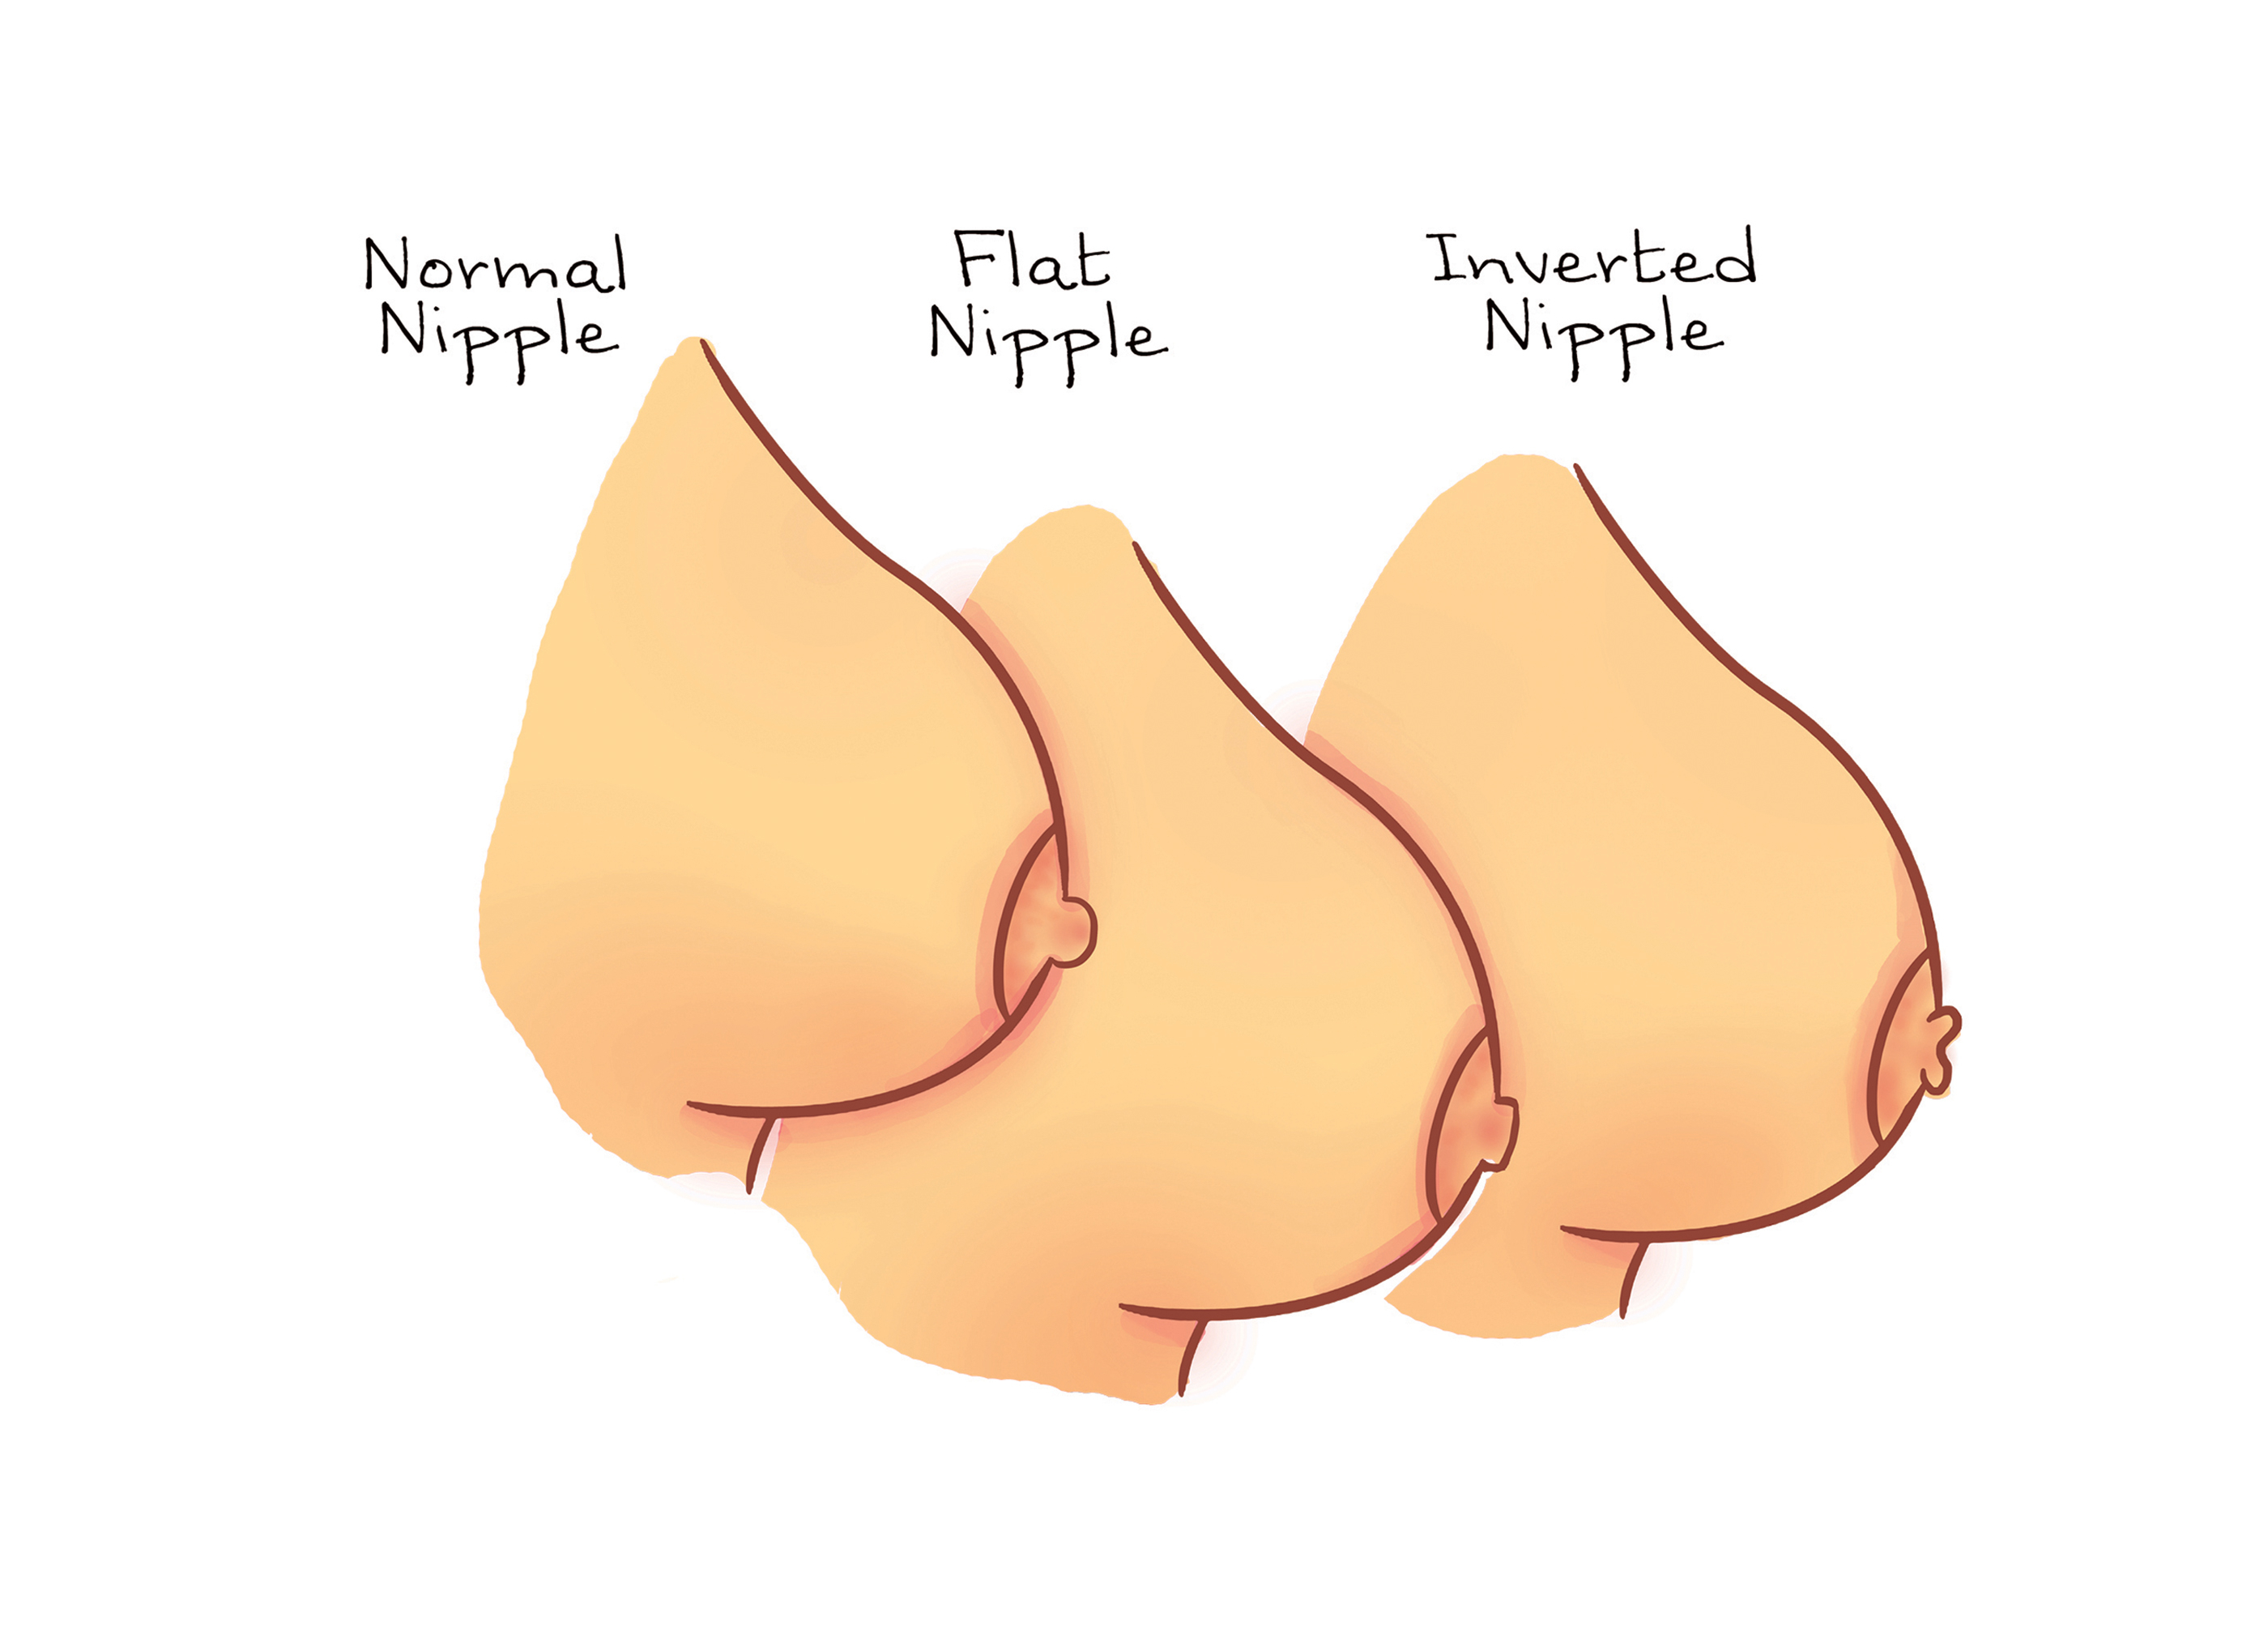 Healthy breast and changes in nipple shape, illustration - Stock